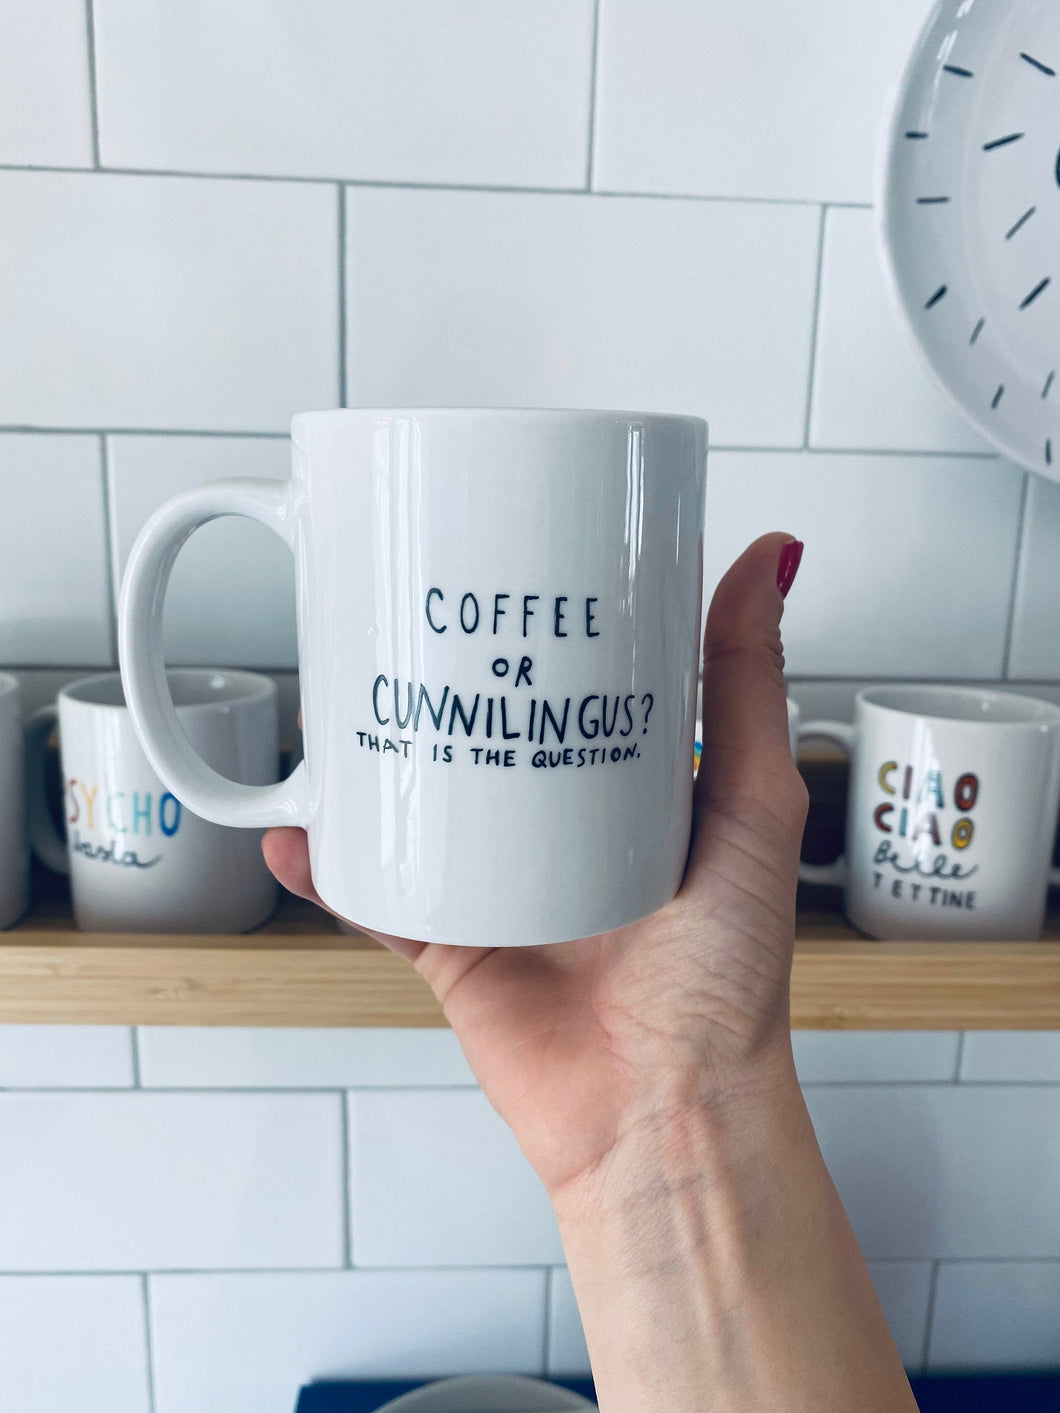 Coffee or Cunnilingus? That is the question.